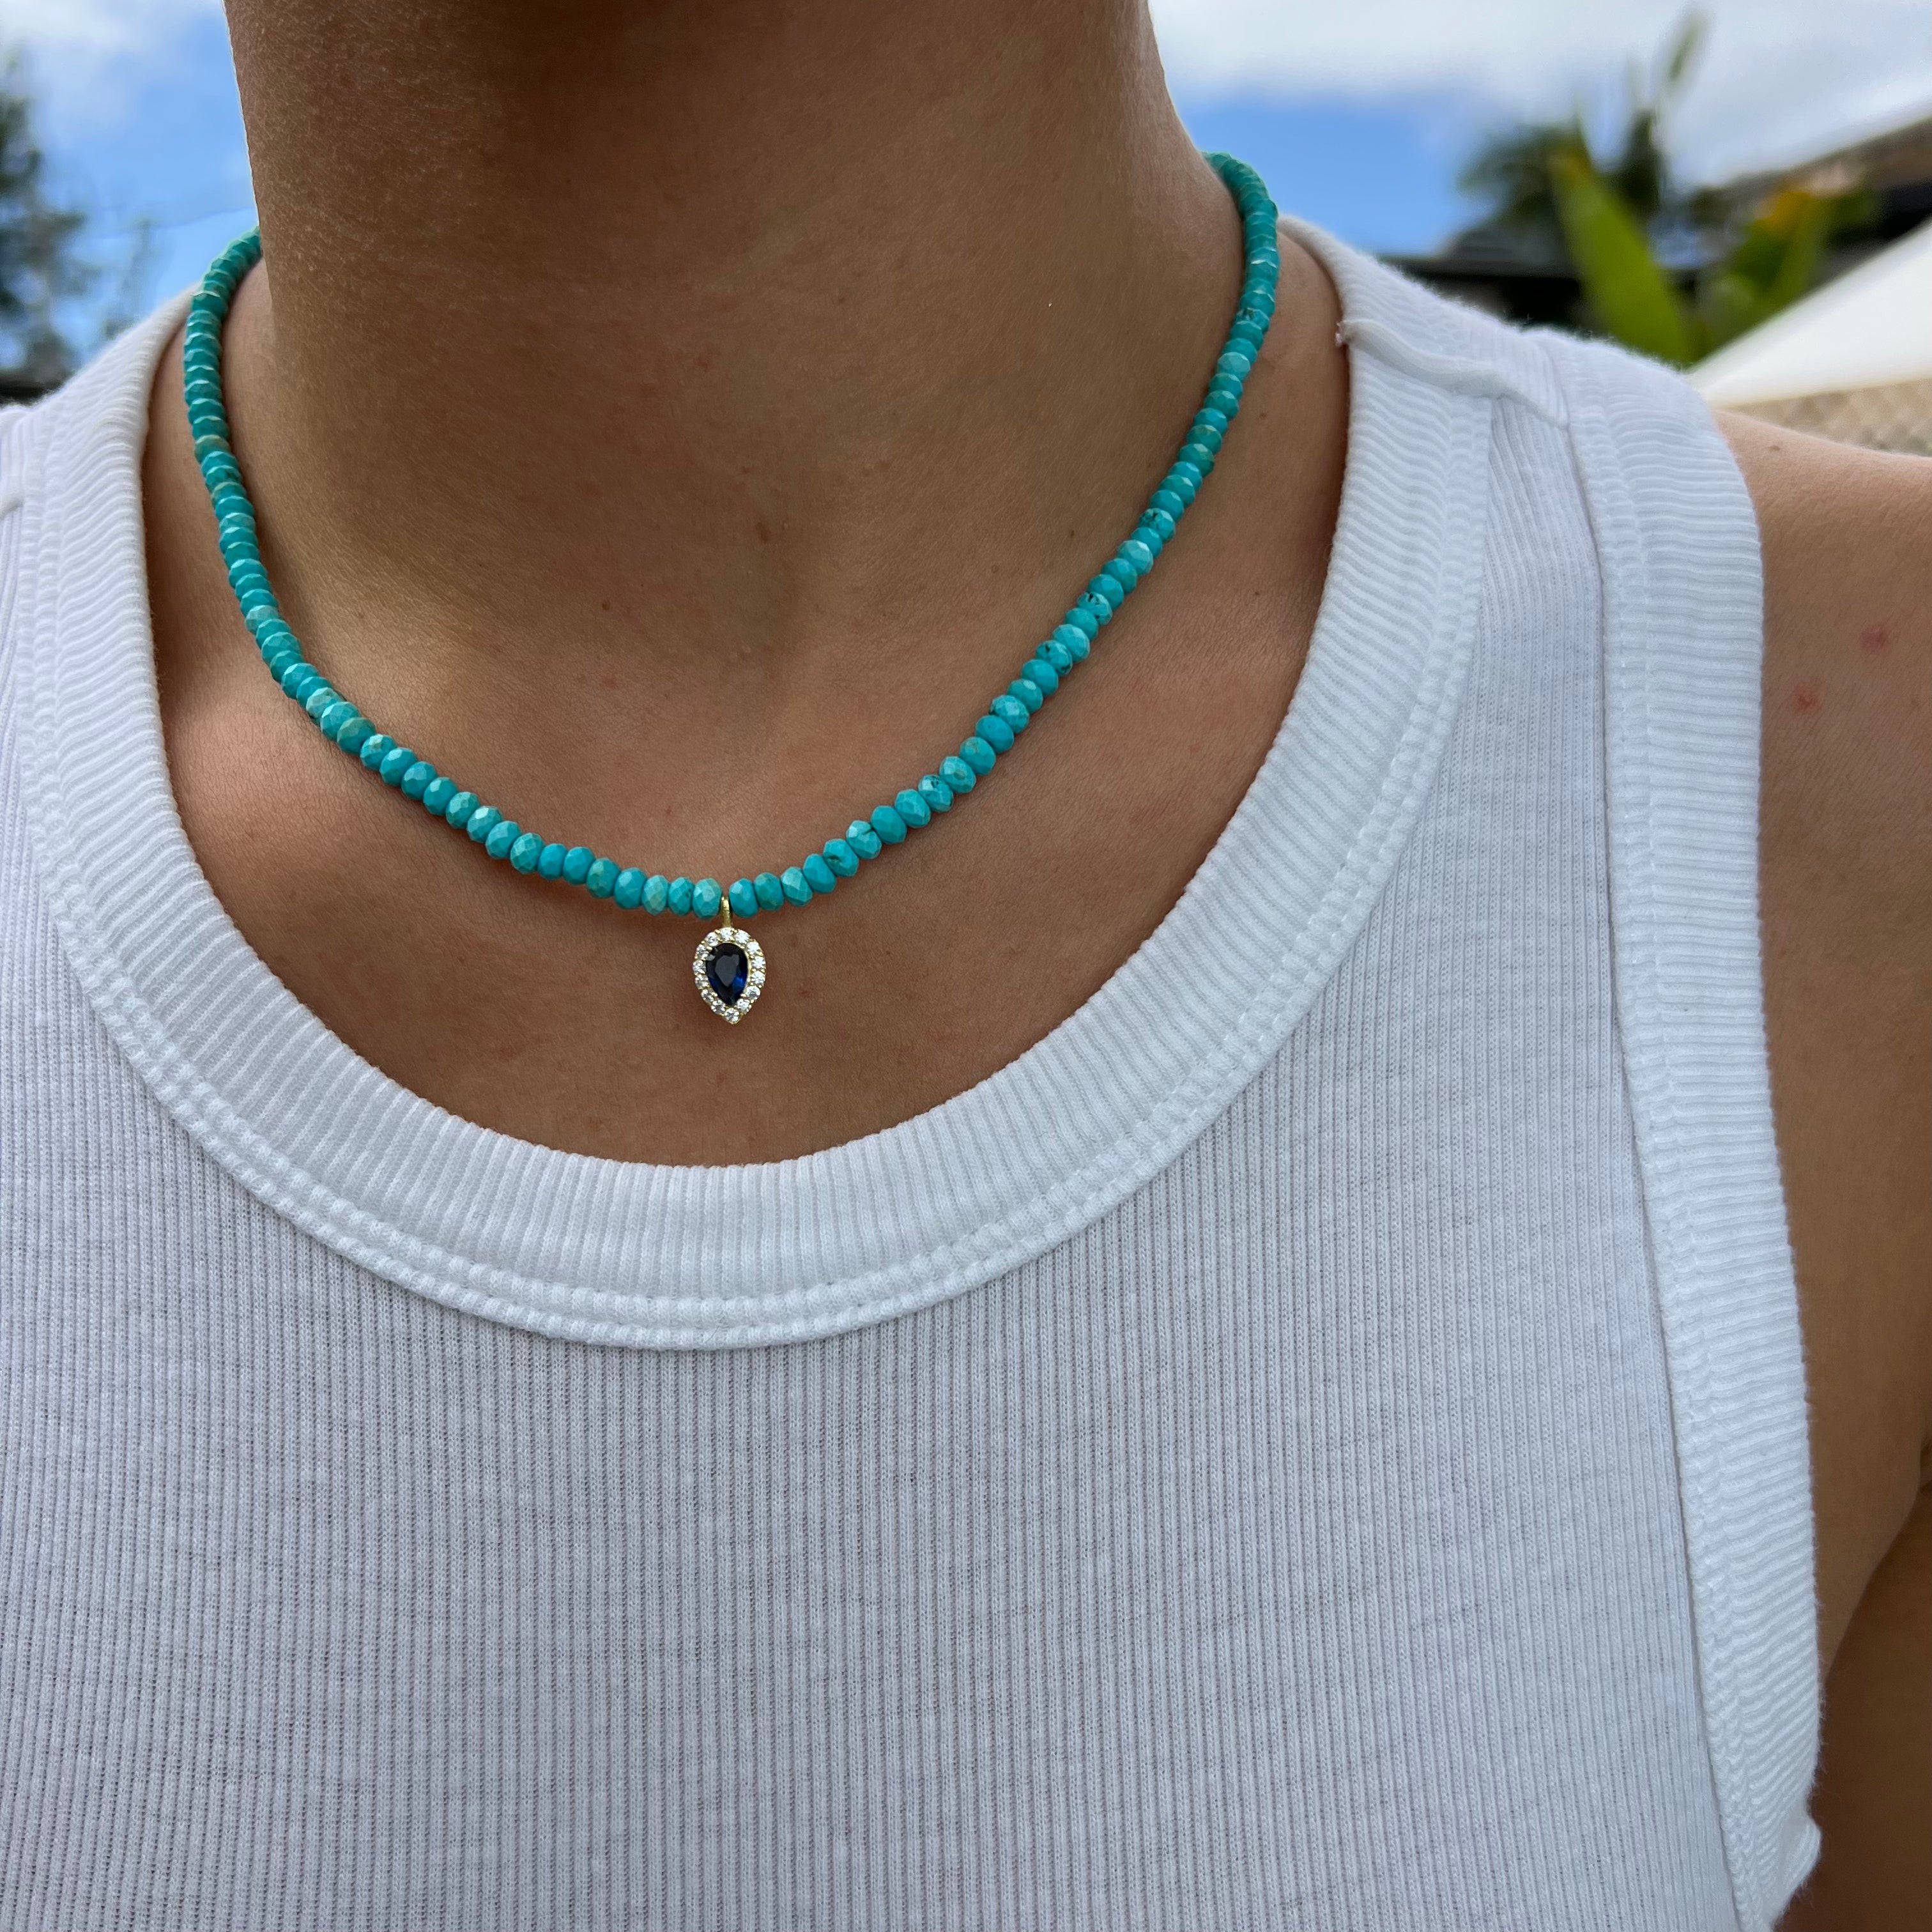 Turquoise beaded sapphire drop stone necklace